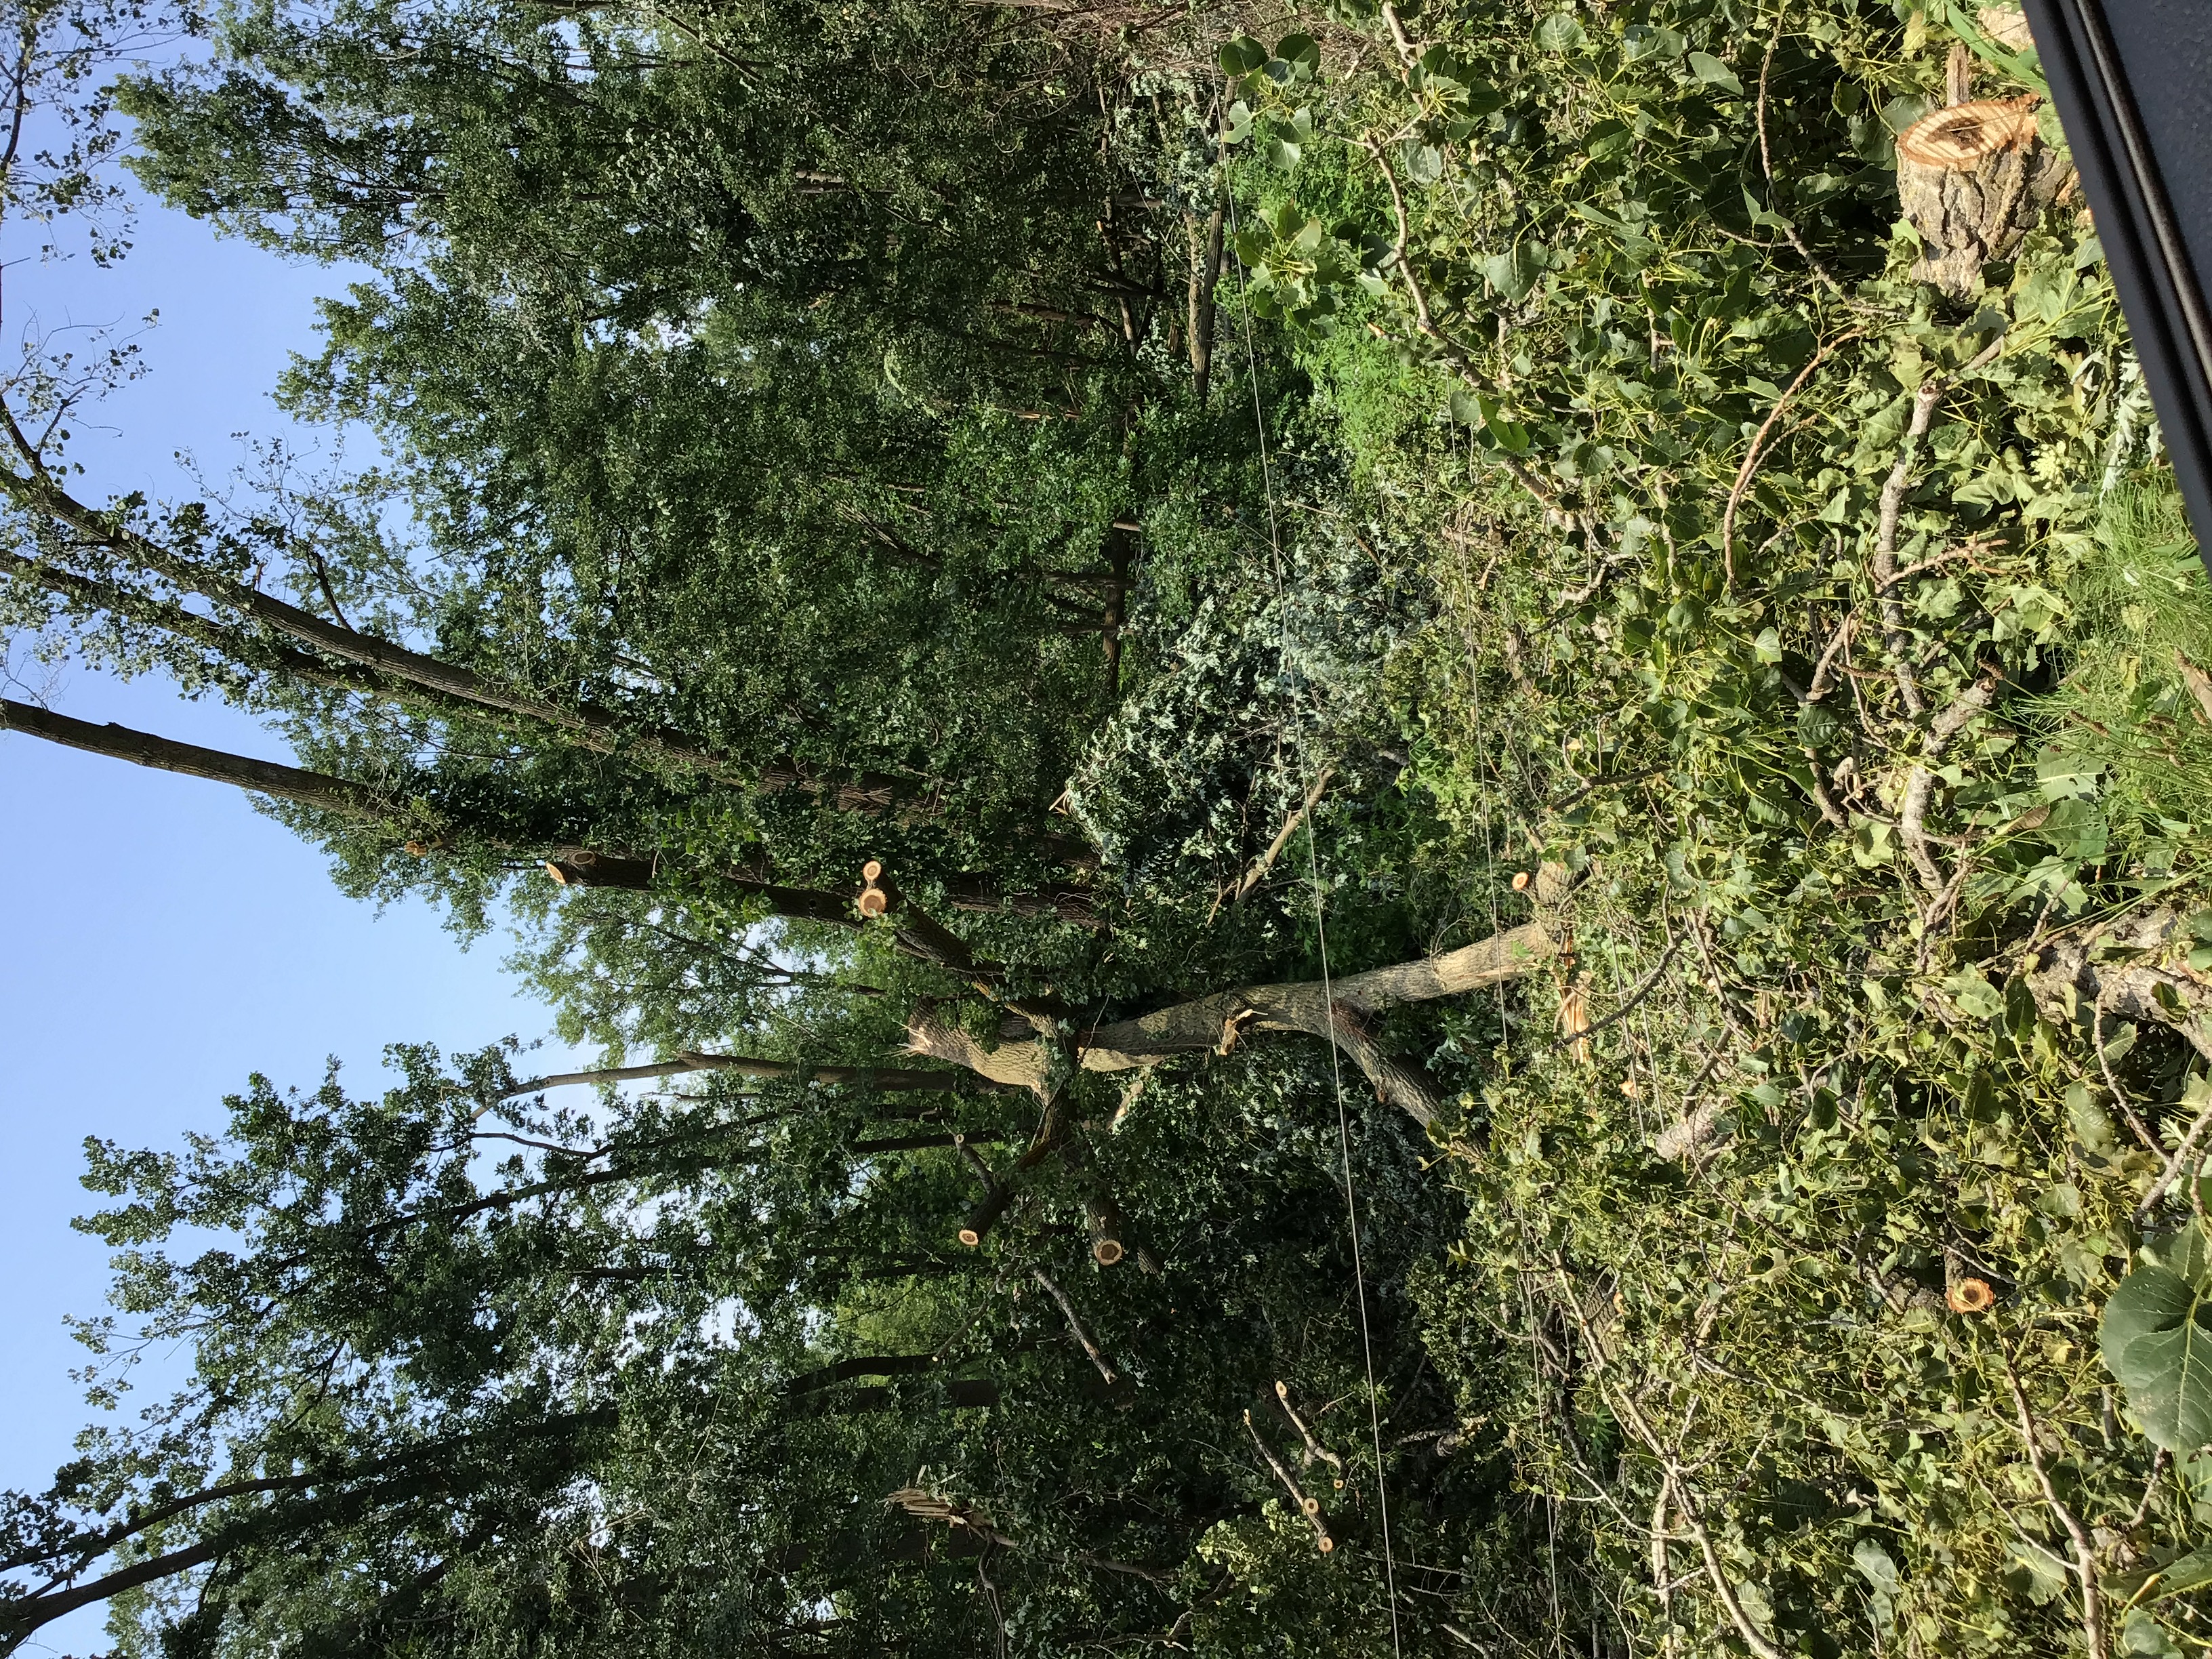 Tree damage near the start of the track